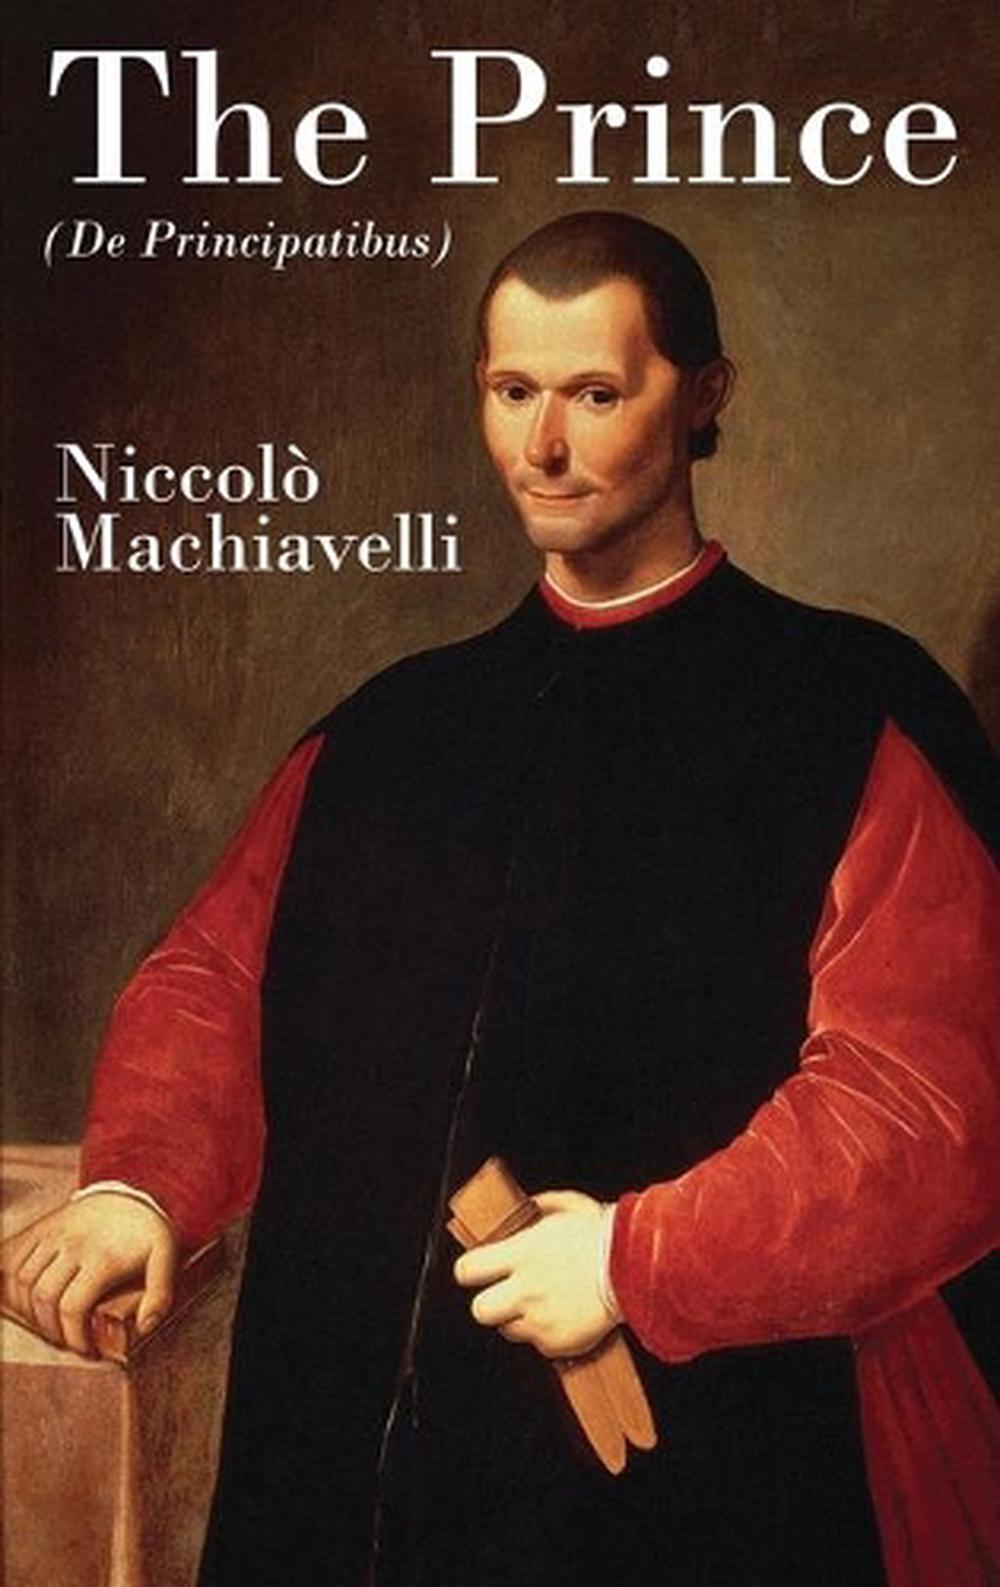 book review of the prince by machiavelli